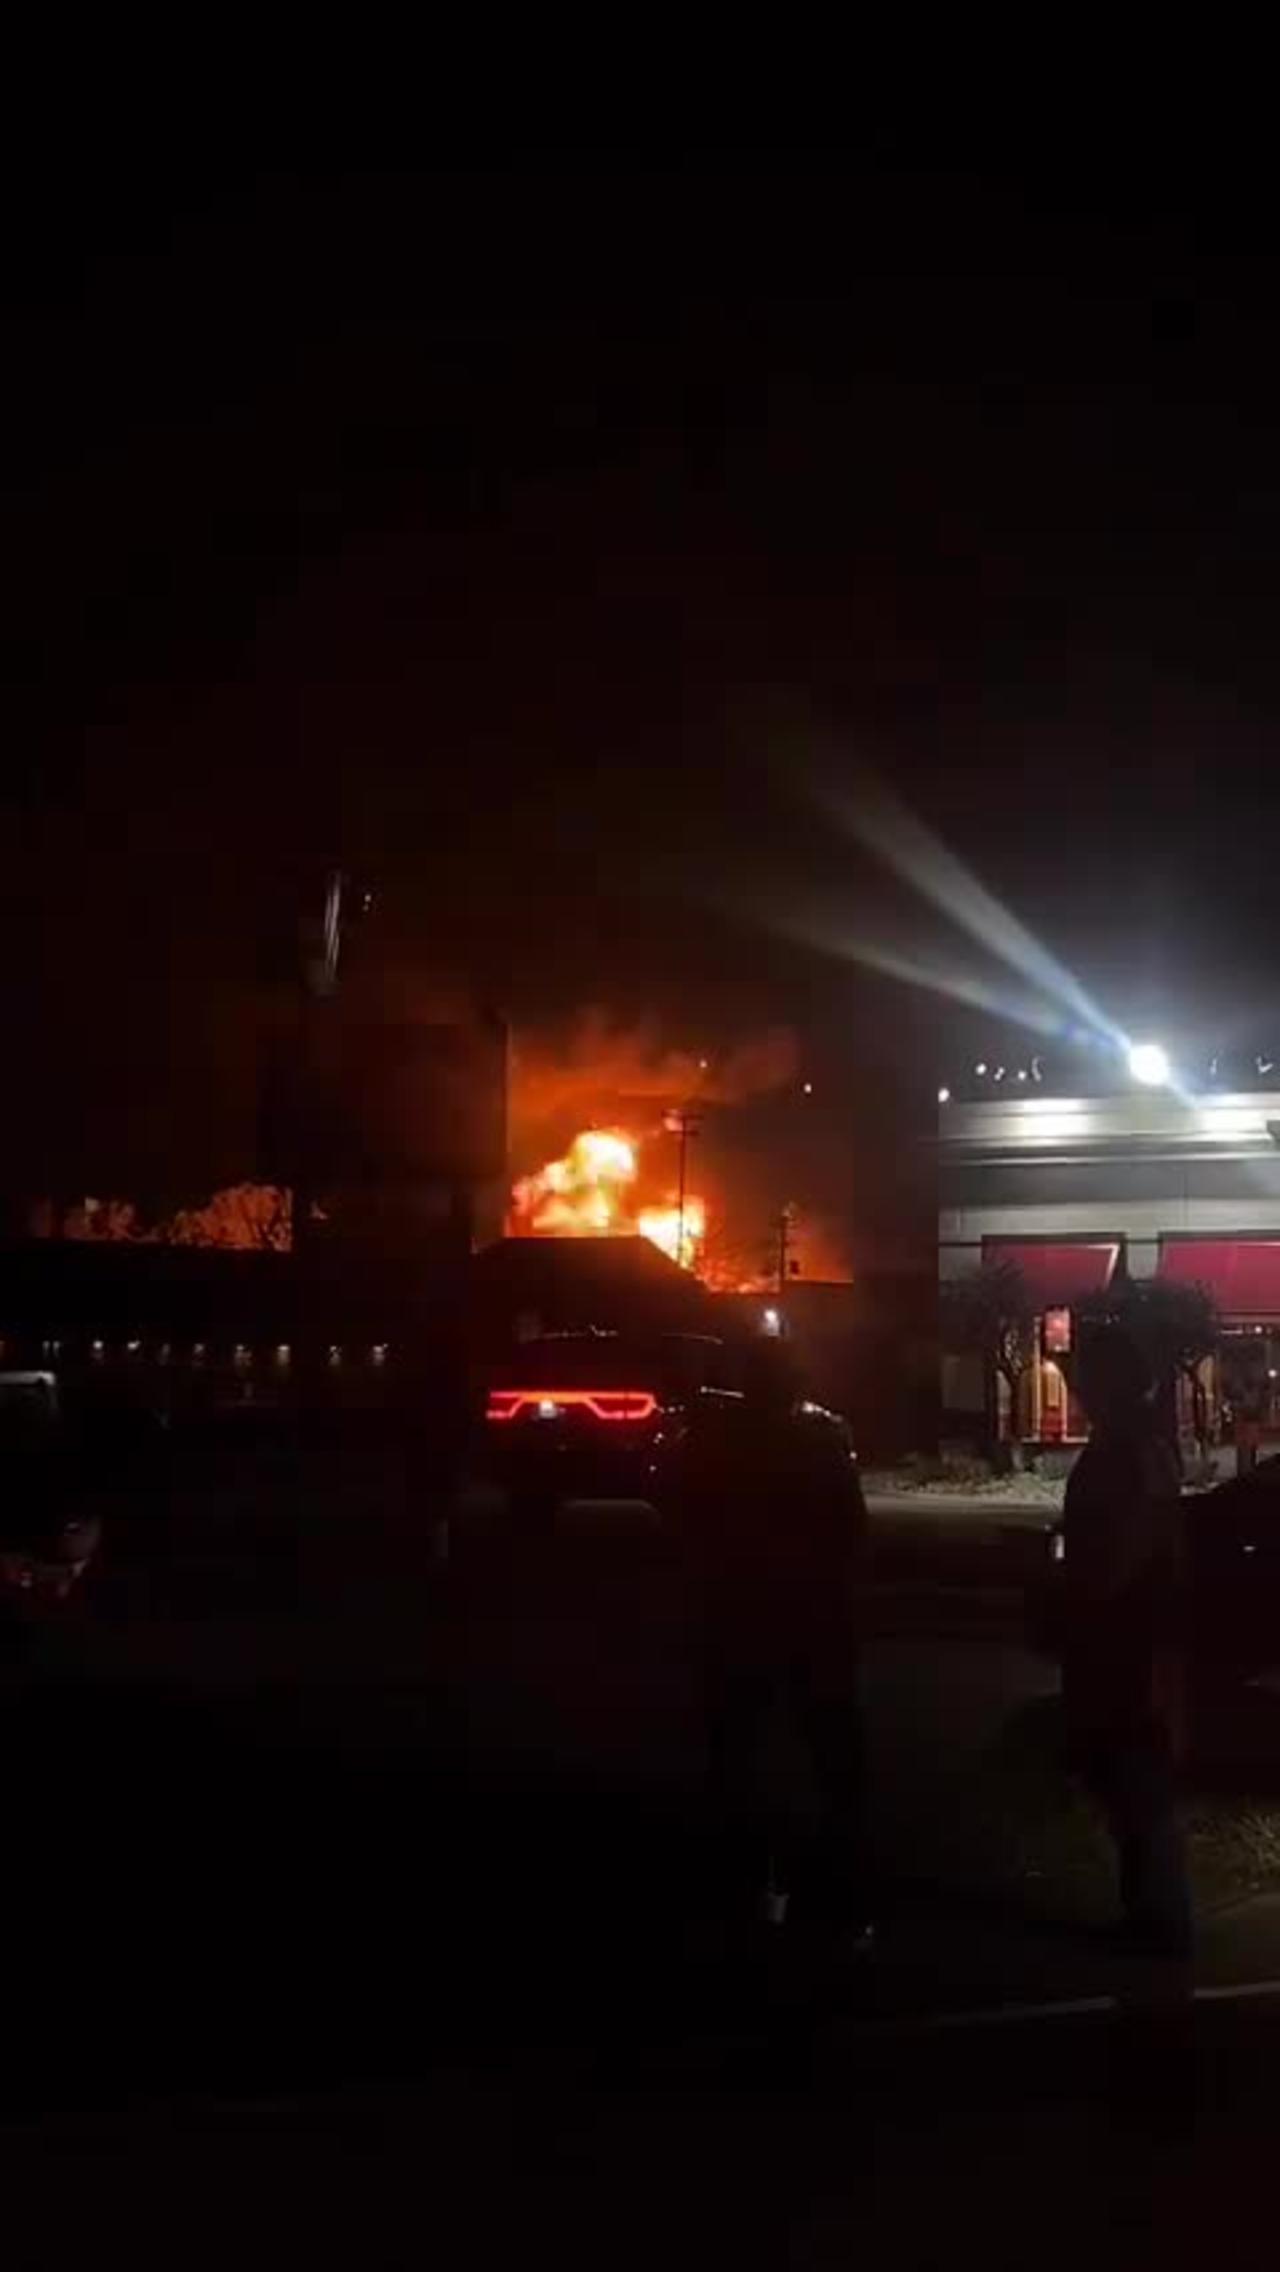 Multiple explosions in Clinton Township, Michigan after a large industrial fire broke out.